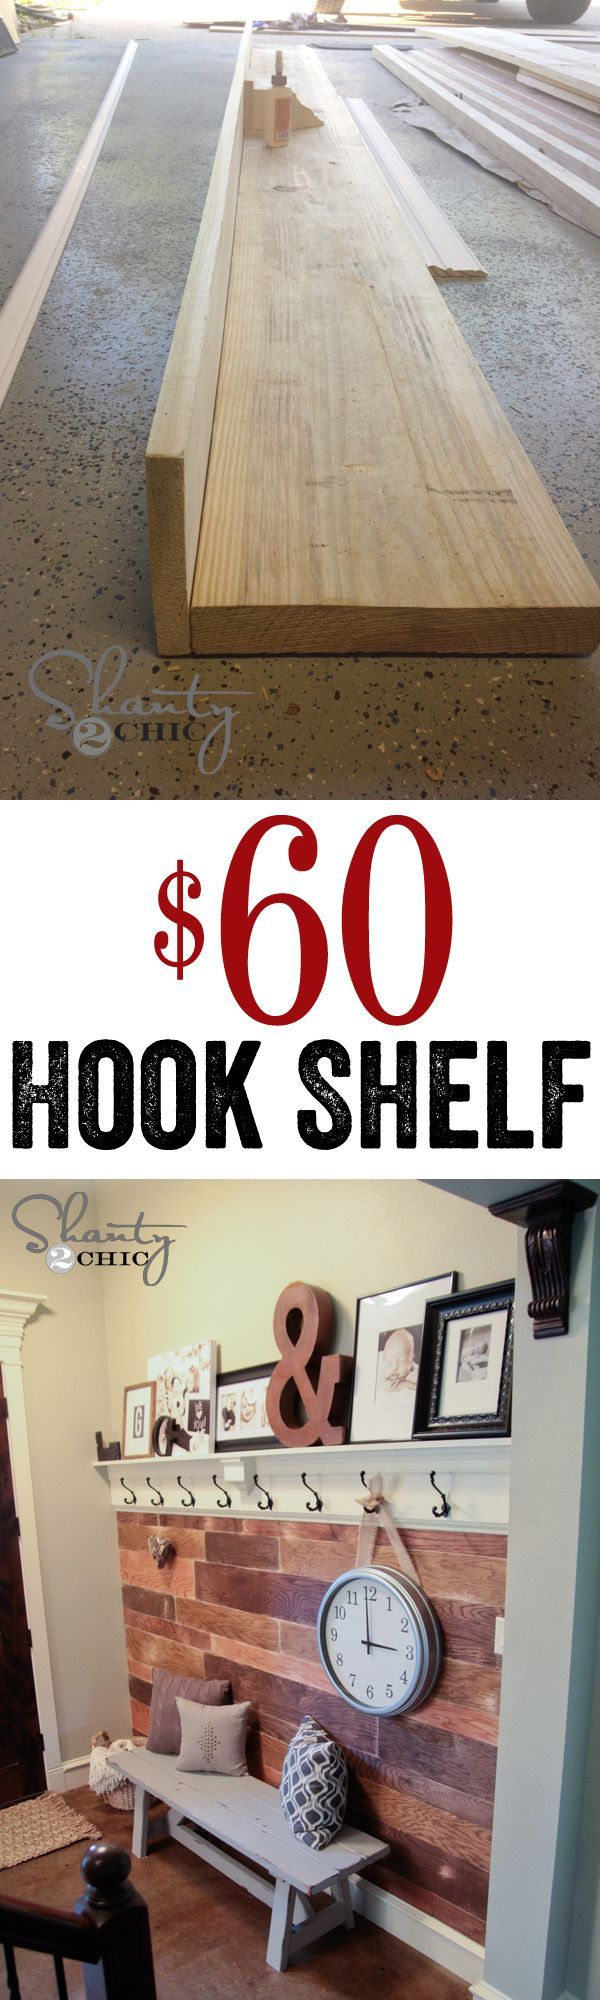 DIY Easy and Cheap Hook Shelf for under $60!  Perfect for any wall!!